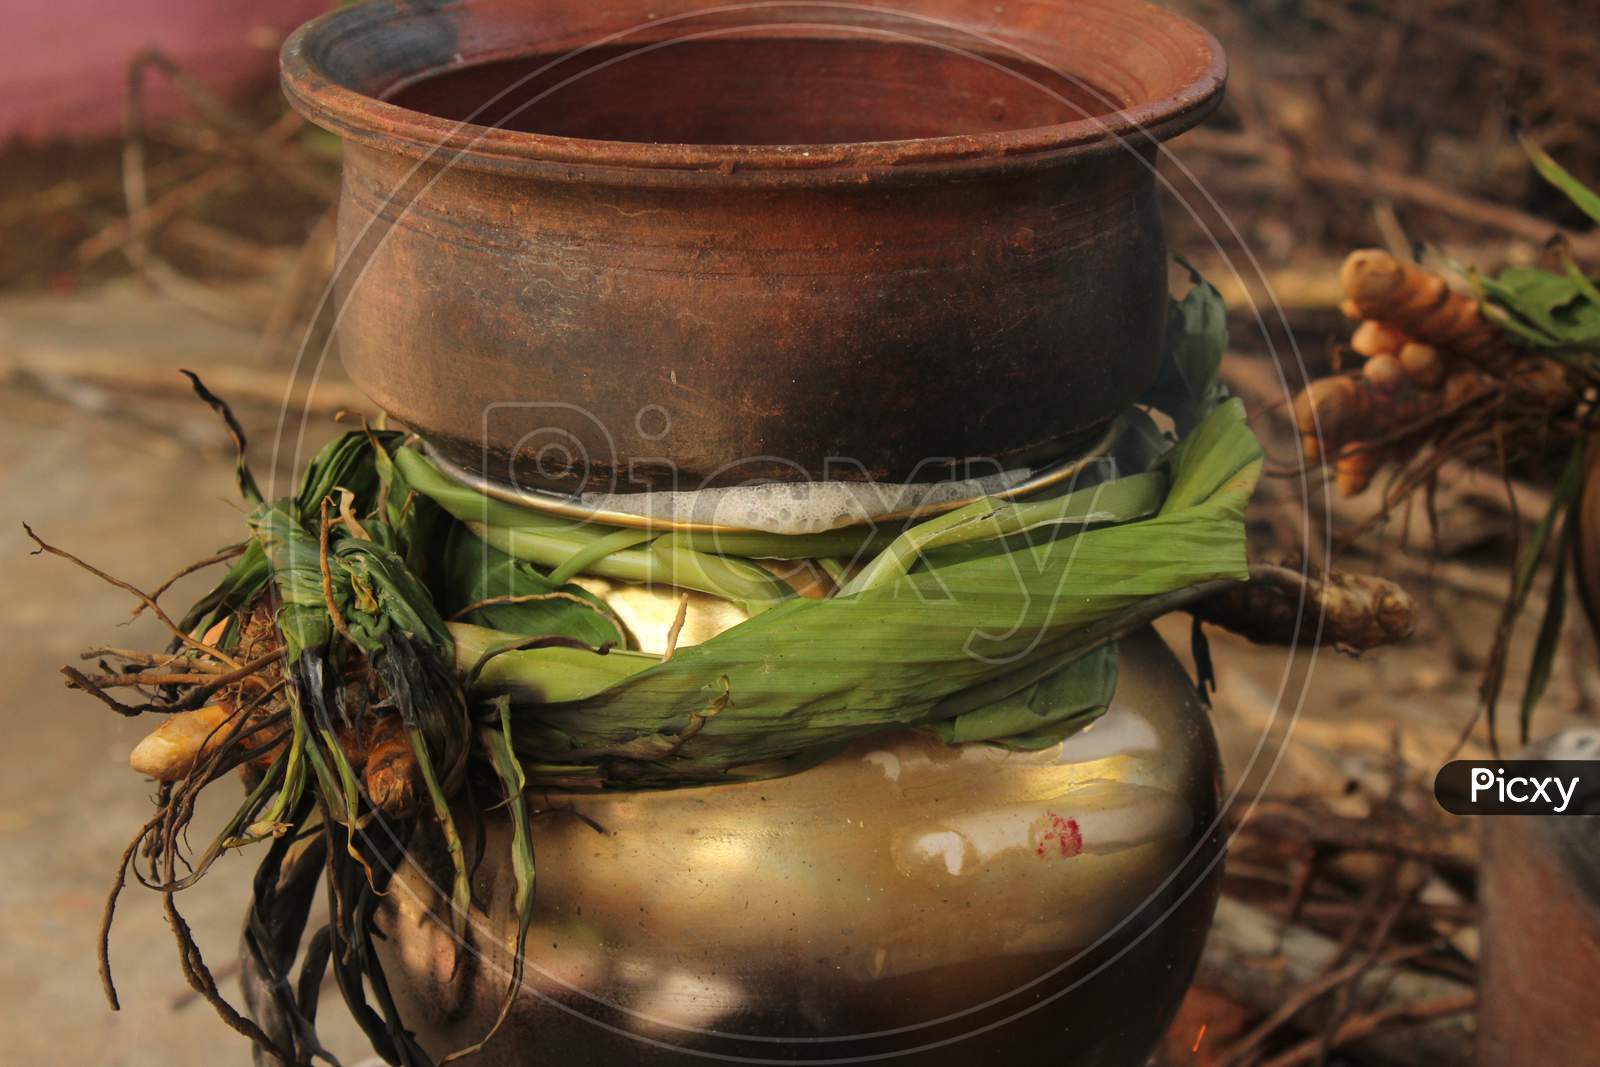 Celebrating Traditional Thai Pongal Festival To Sun God With Pot, Lamp,Wood Fire Stove, Fruits And Sugarcane. Making Sakkarai Or Sugar Pongal And Ven Pongal In Sand Stove In Traditional Method.